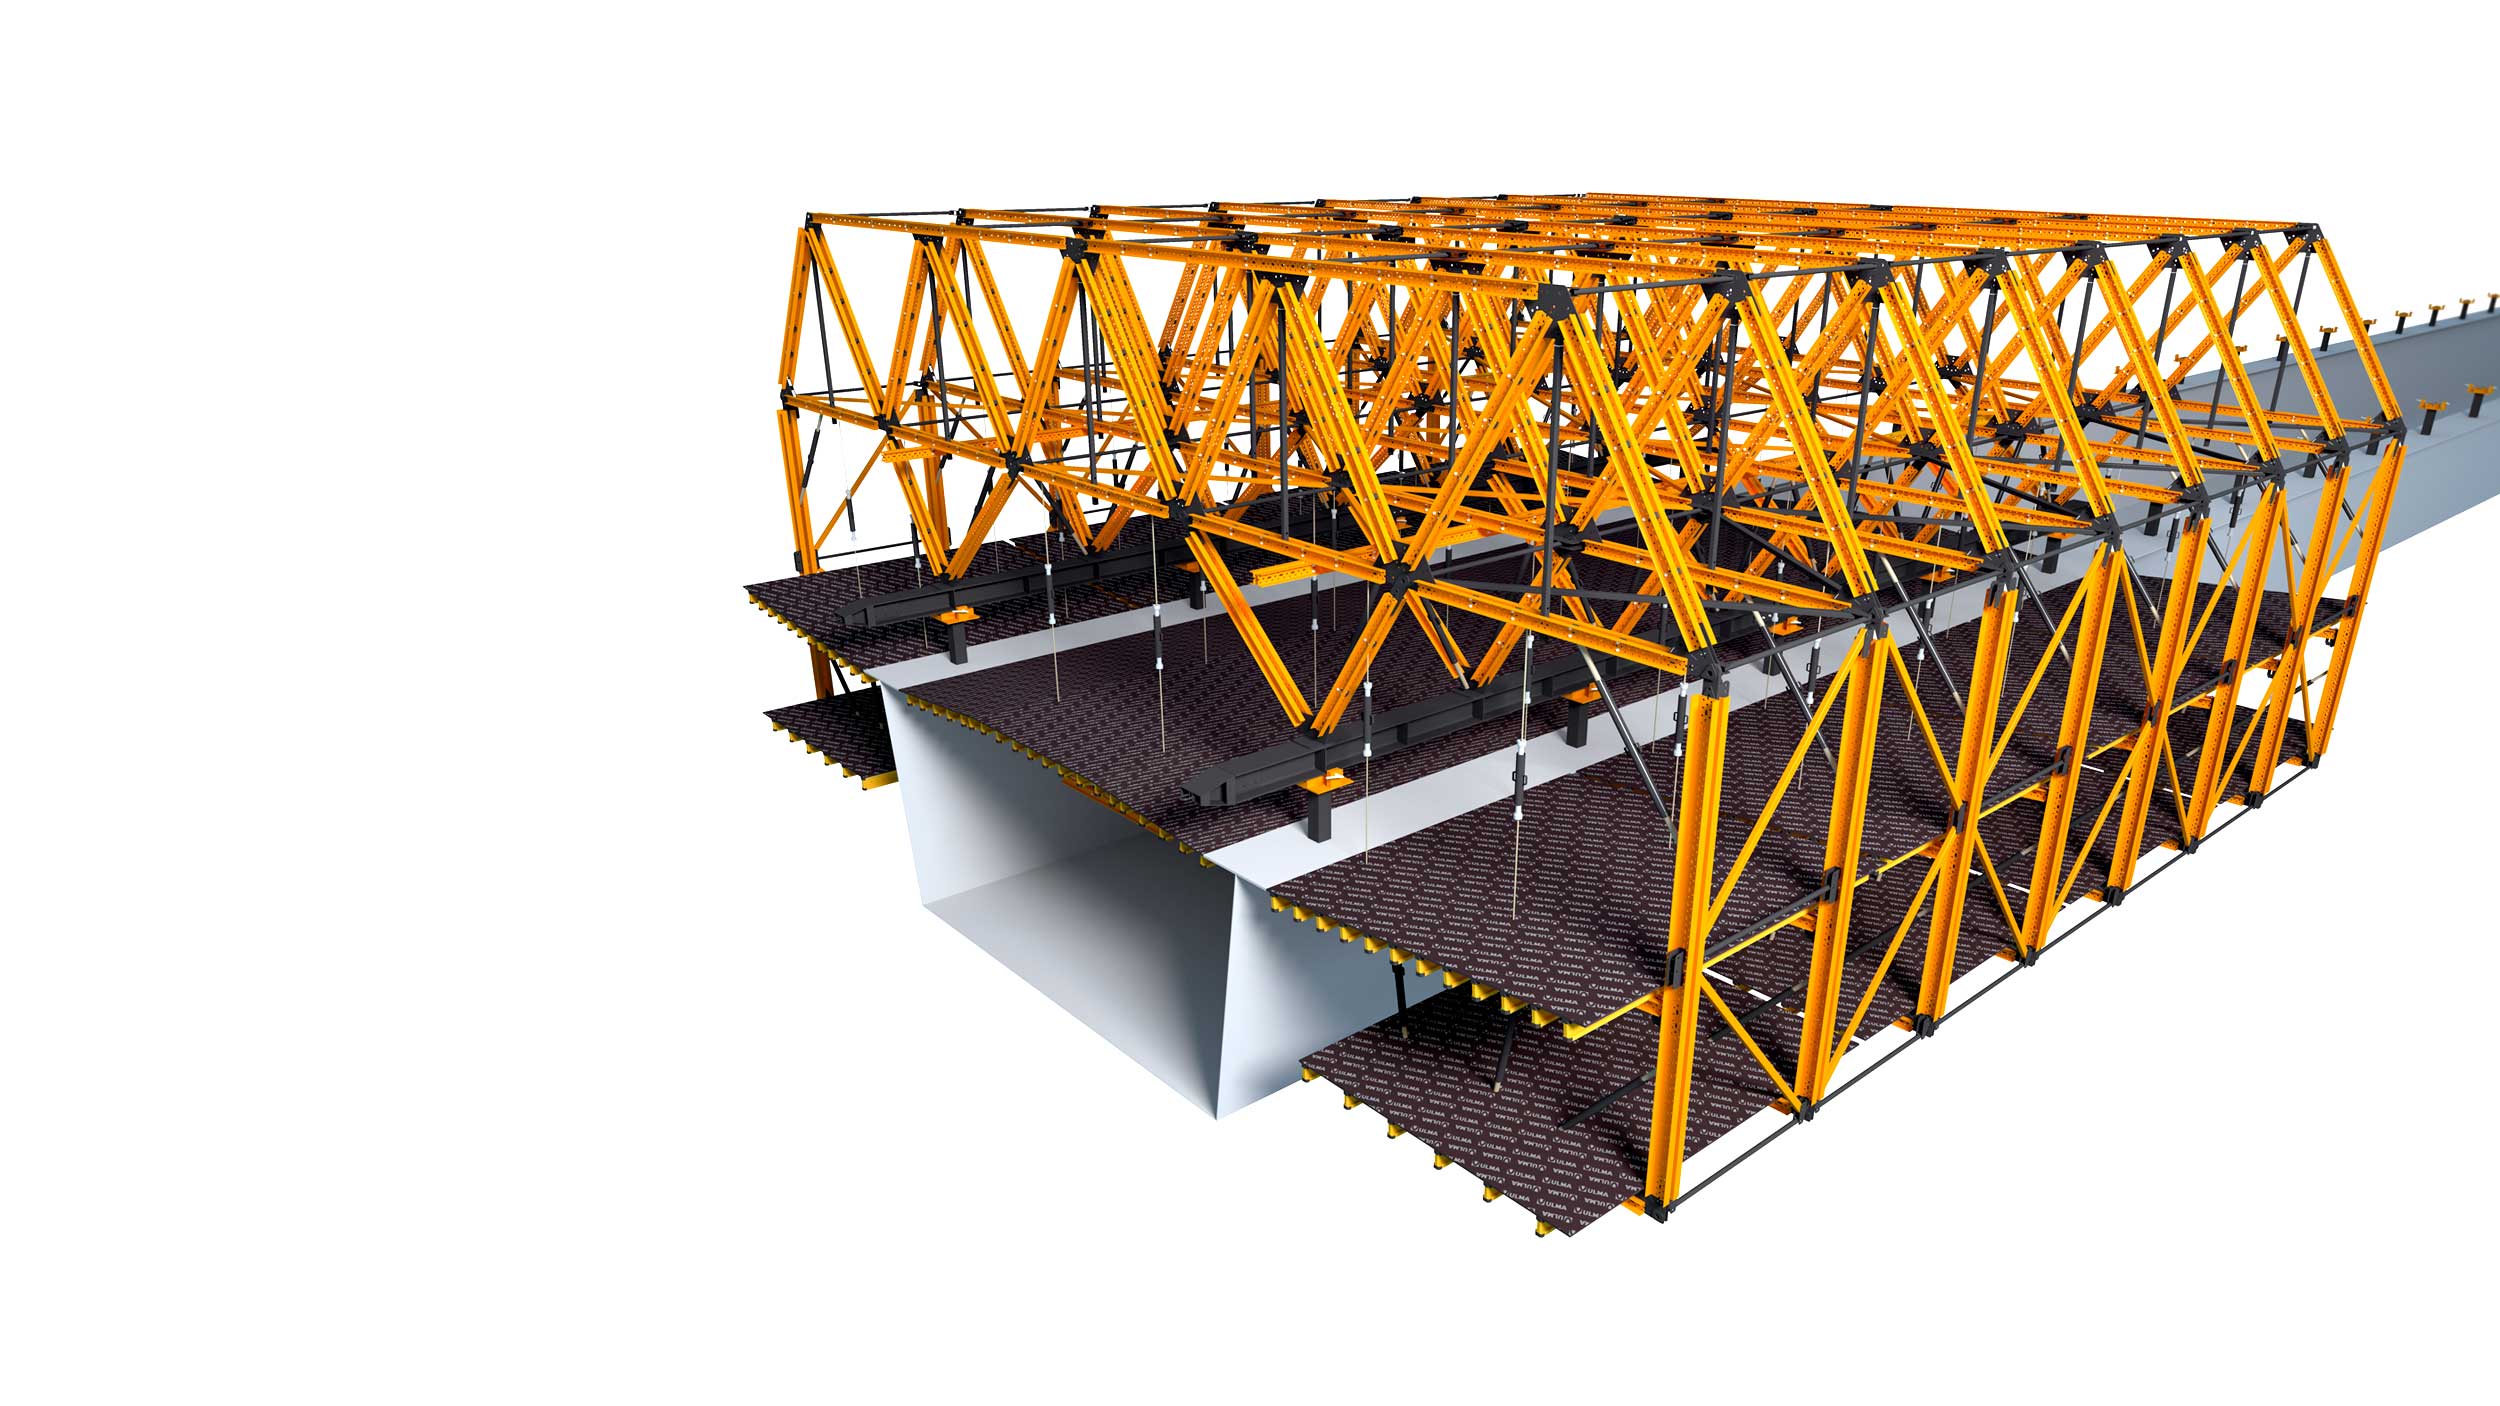 Cantilever formwork for steel composite bridges and partially pre-cast concrete bridges. Highlights: configurable for each project. Allows quick work cycles.